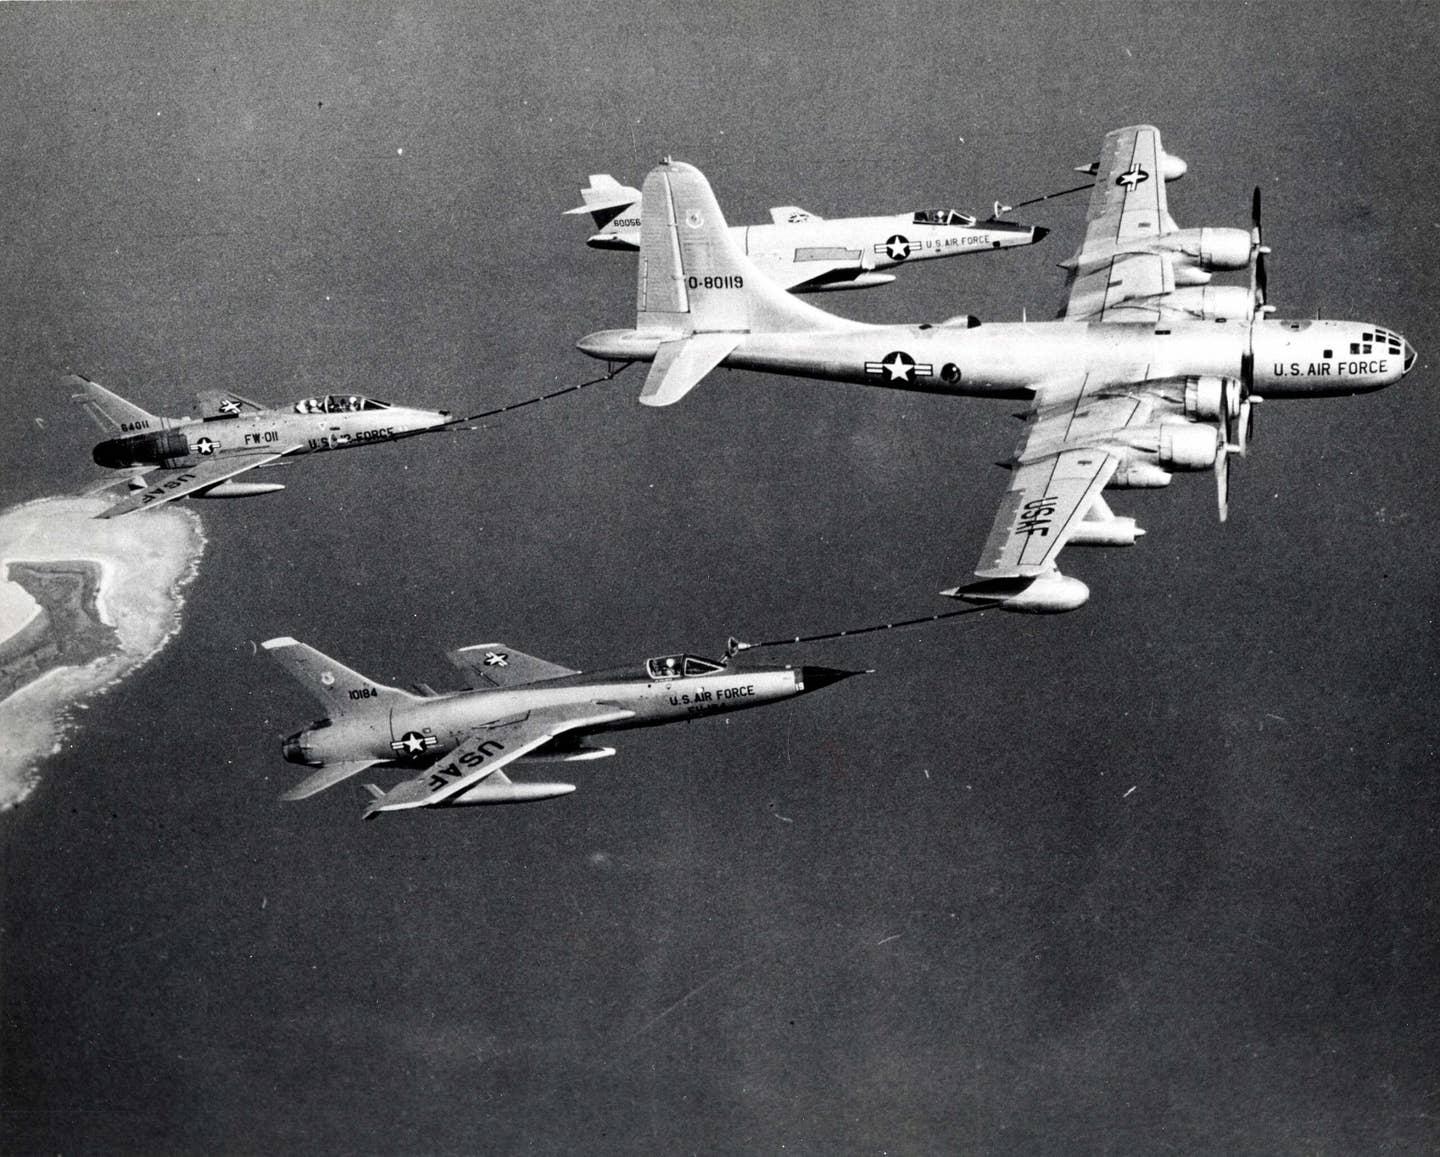 The KB-50J could refuel three fighters simultaneously.